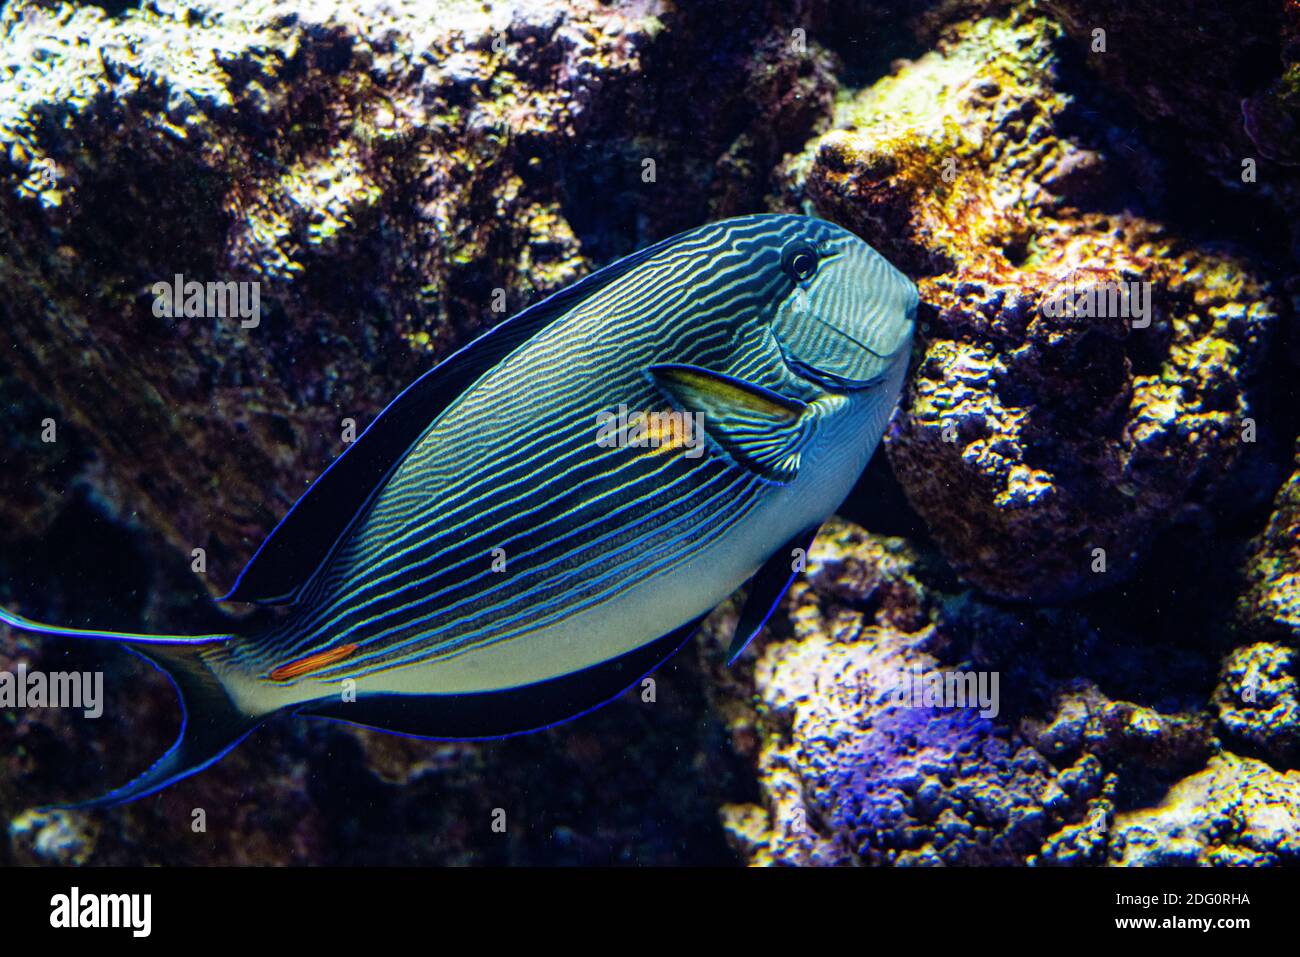 Beautiful sohal surgeon fish on a coral reef.  Stock Photo